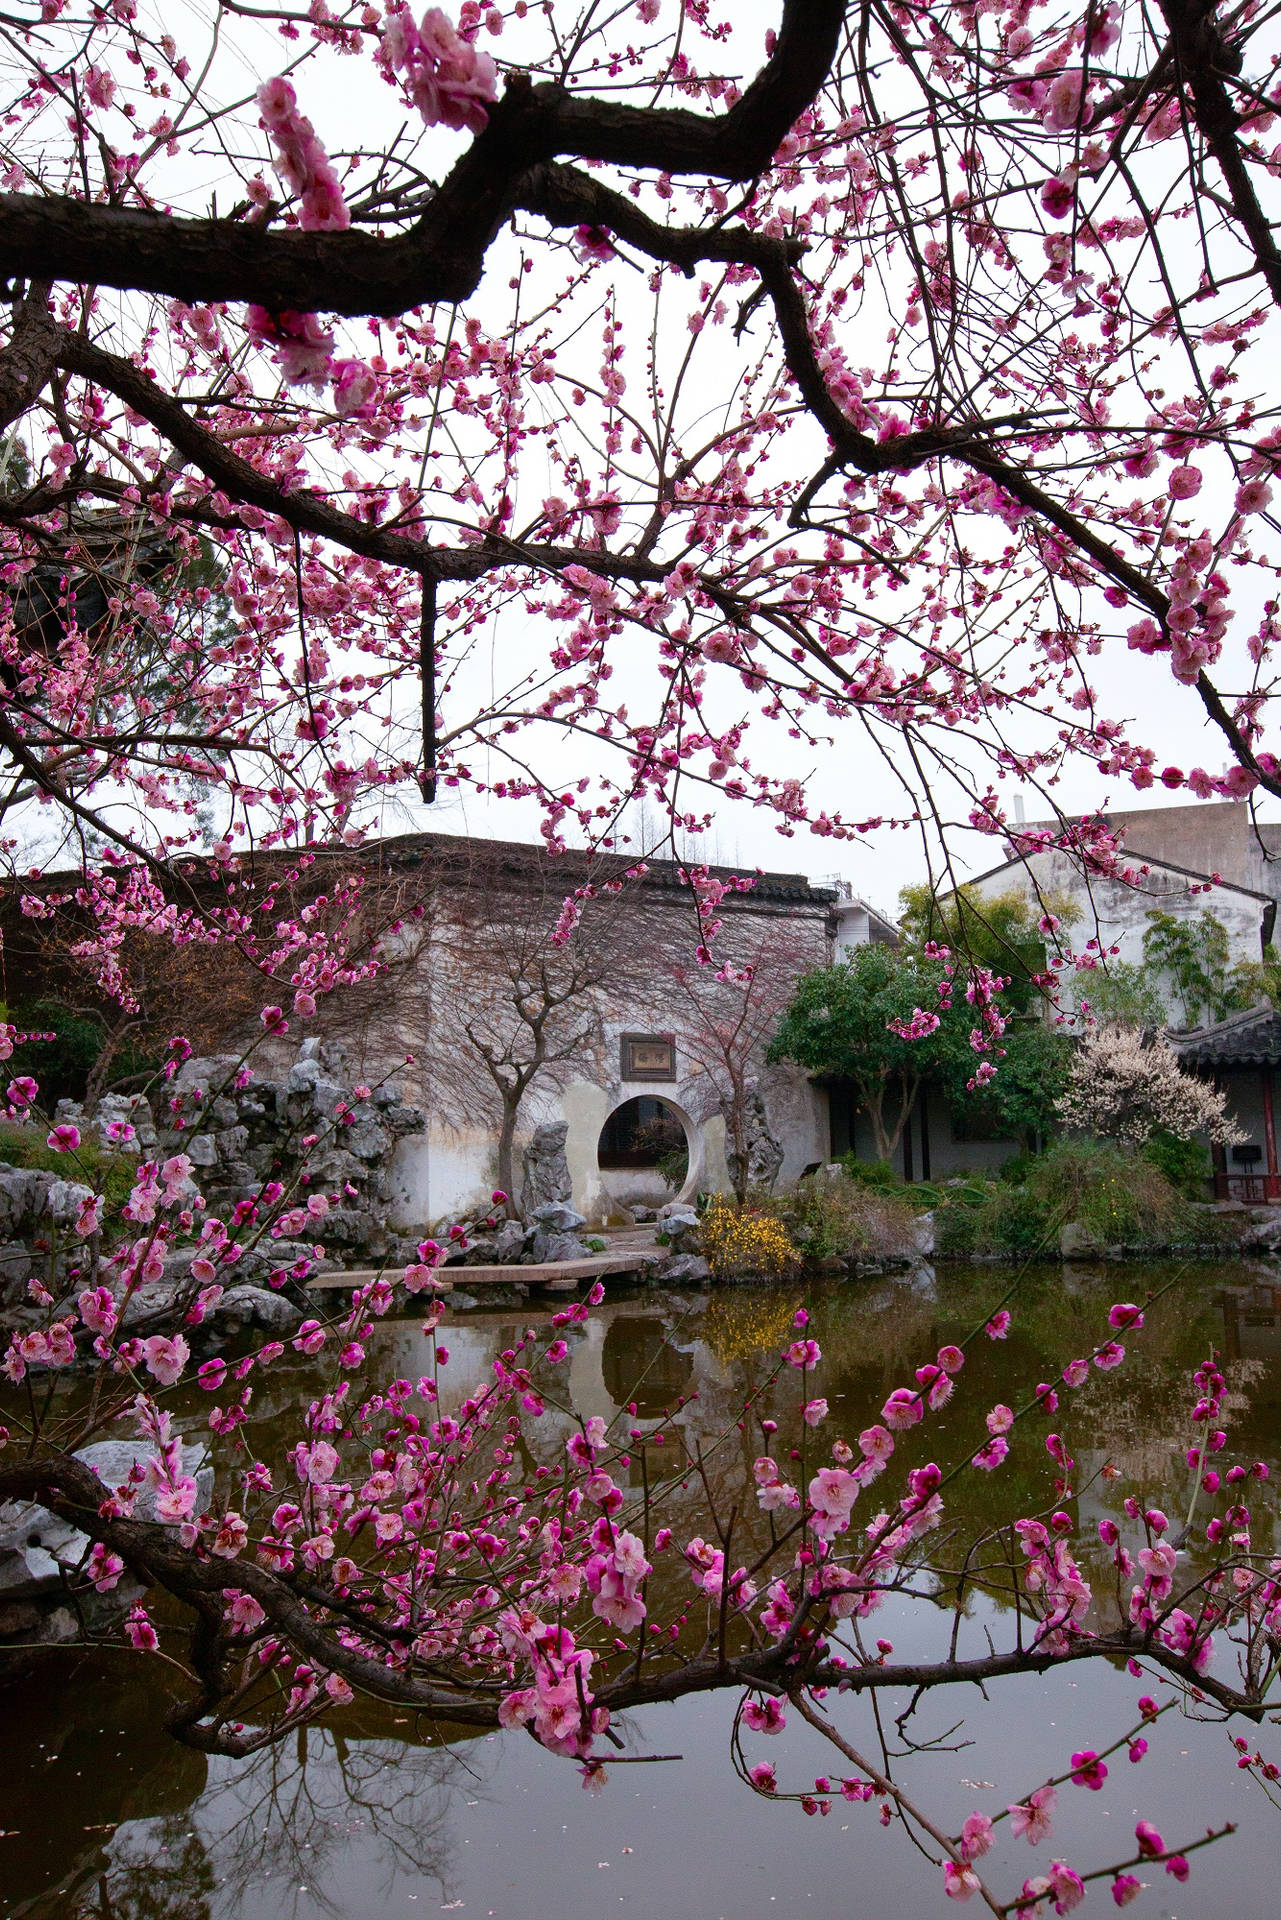 A Picturesque View Of The Serene Waters And Traditional Architecture In Suzhou, China Wallpaper